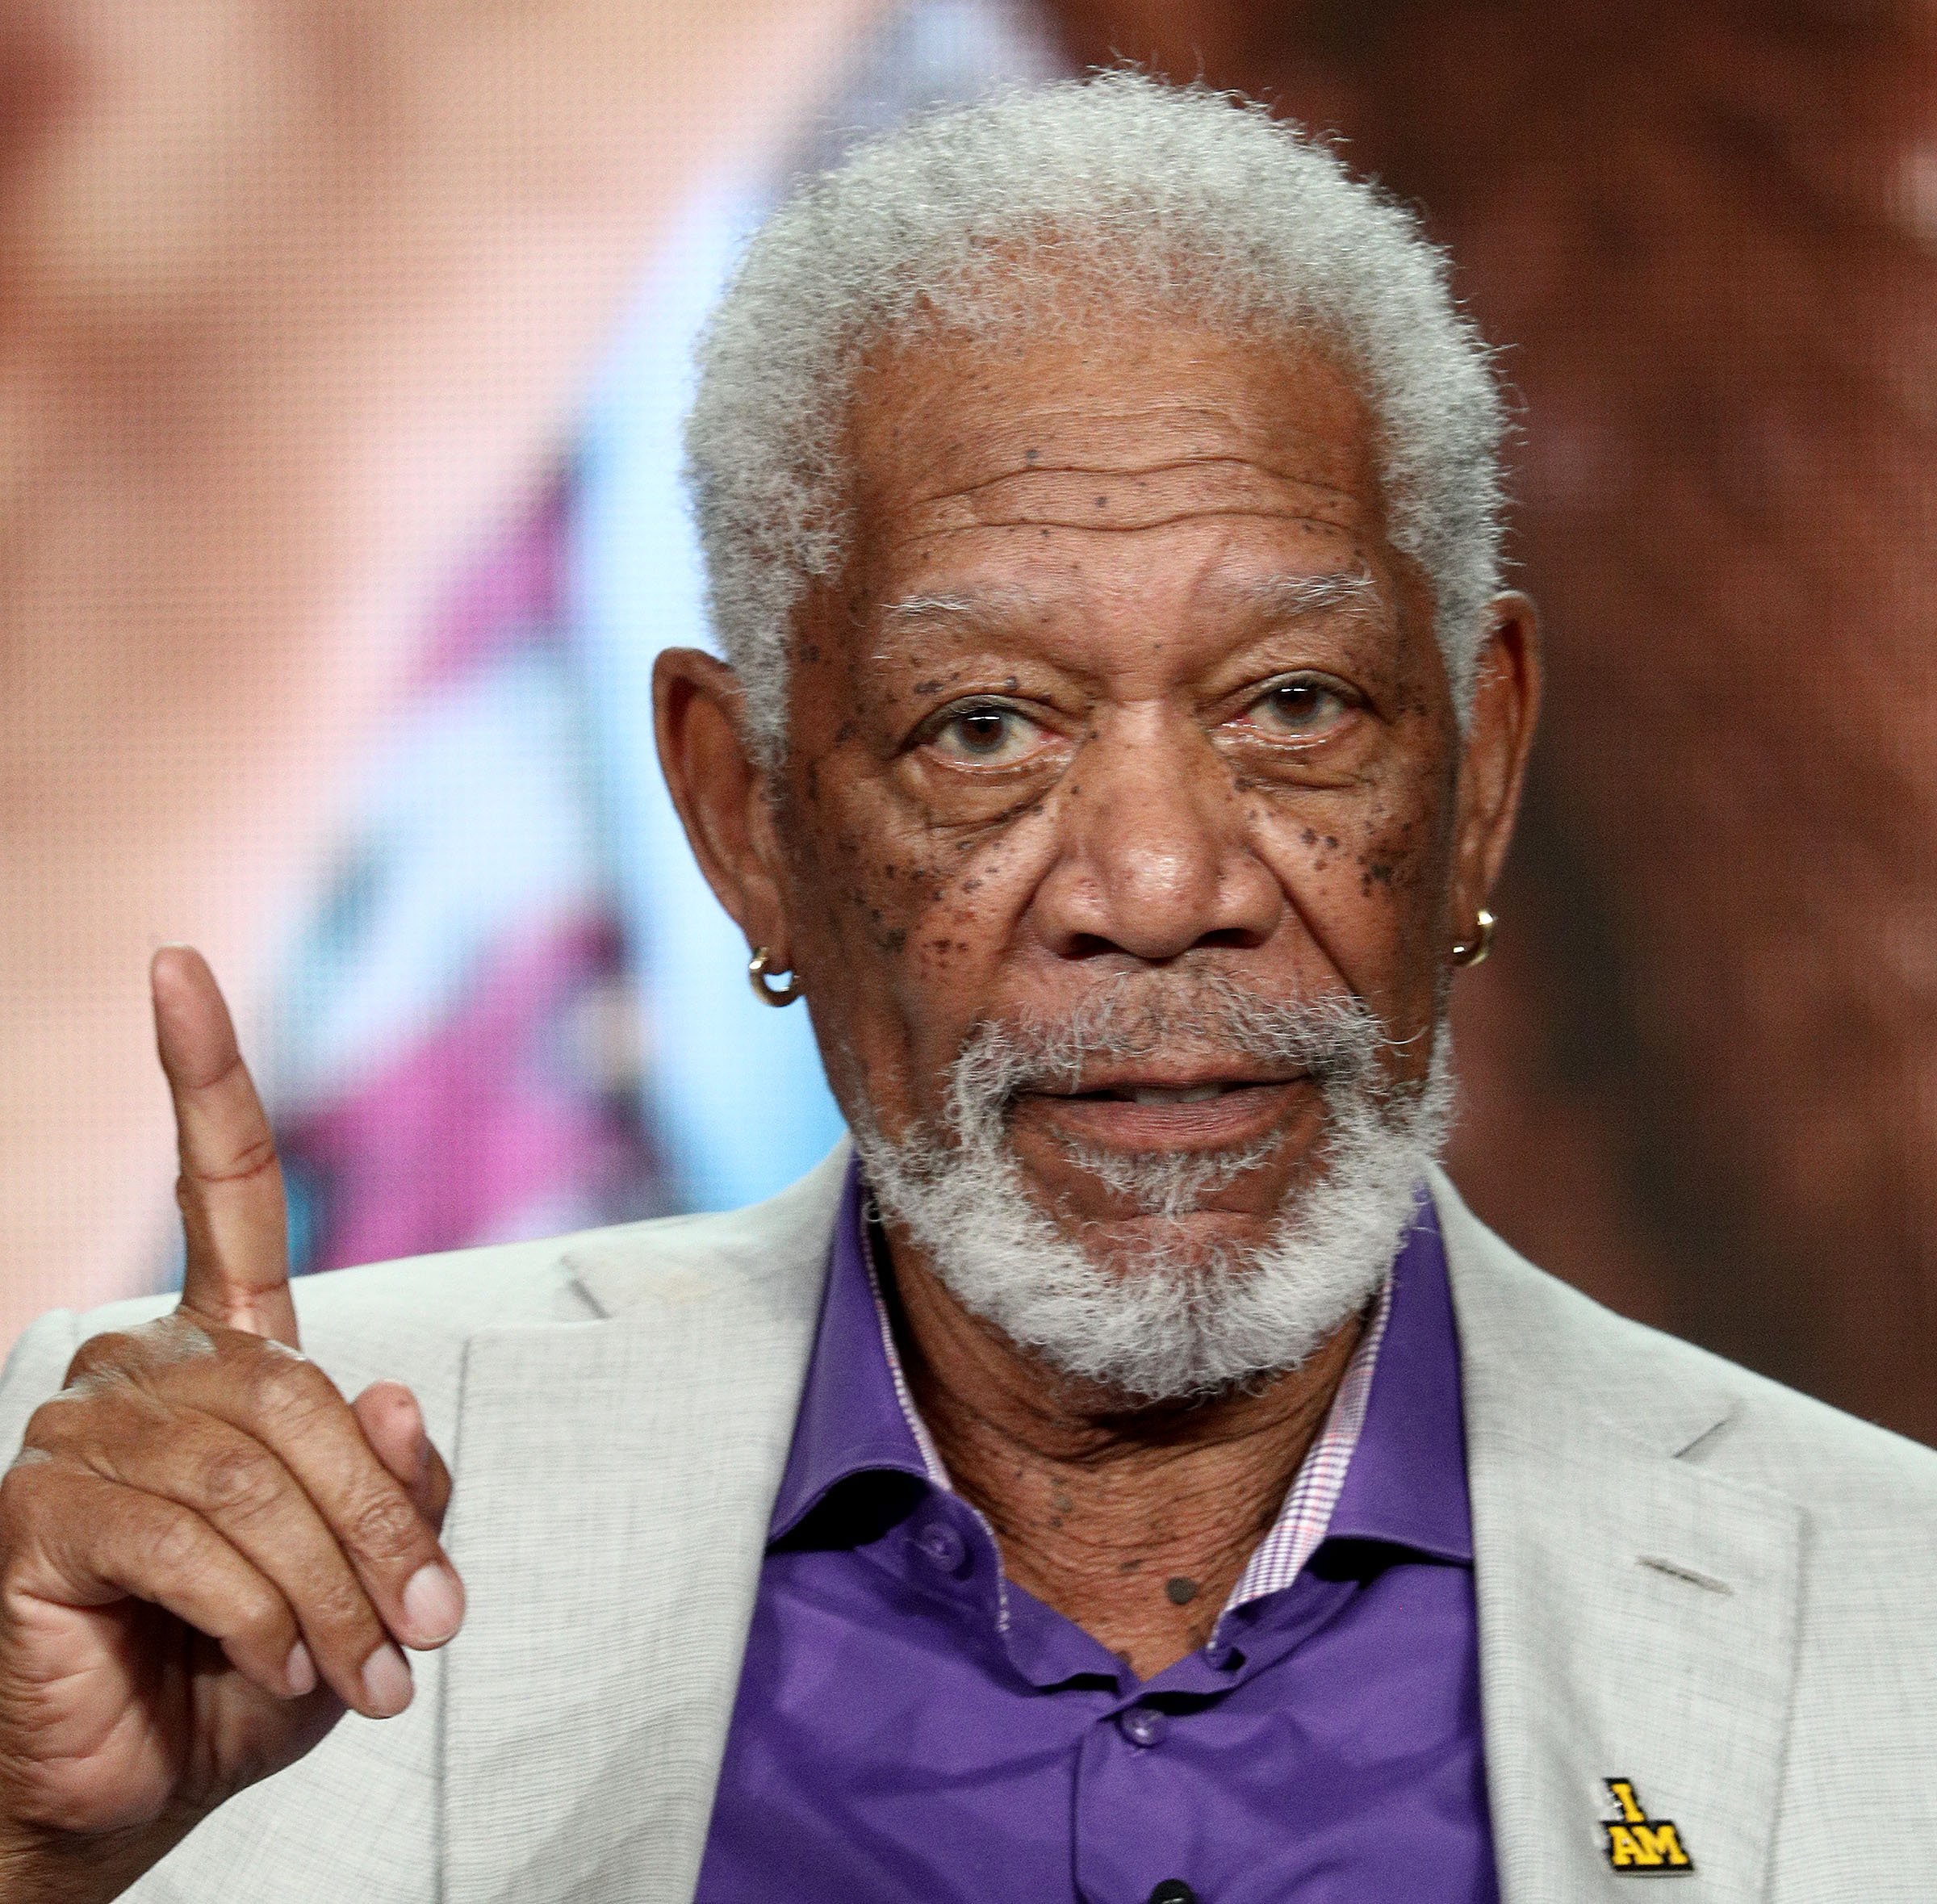 Morgan Freeman in Los Angeles on February 10, 2019 | Source: Getty Images